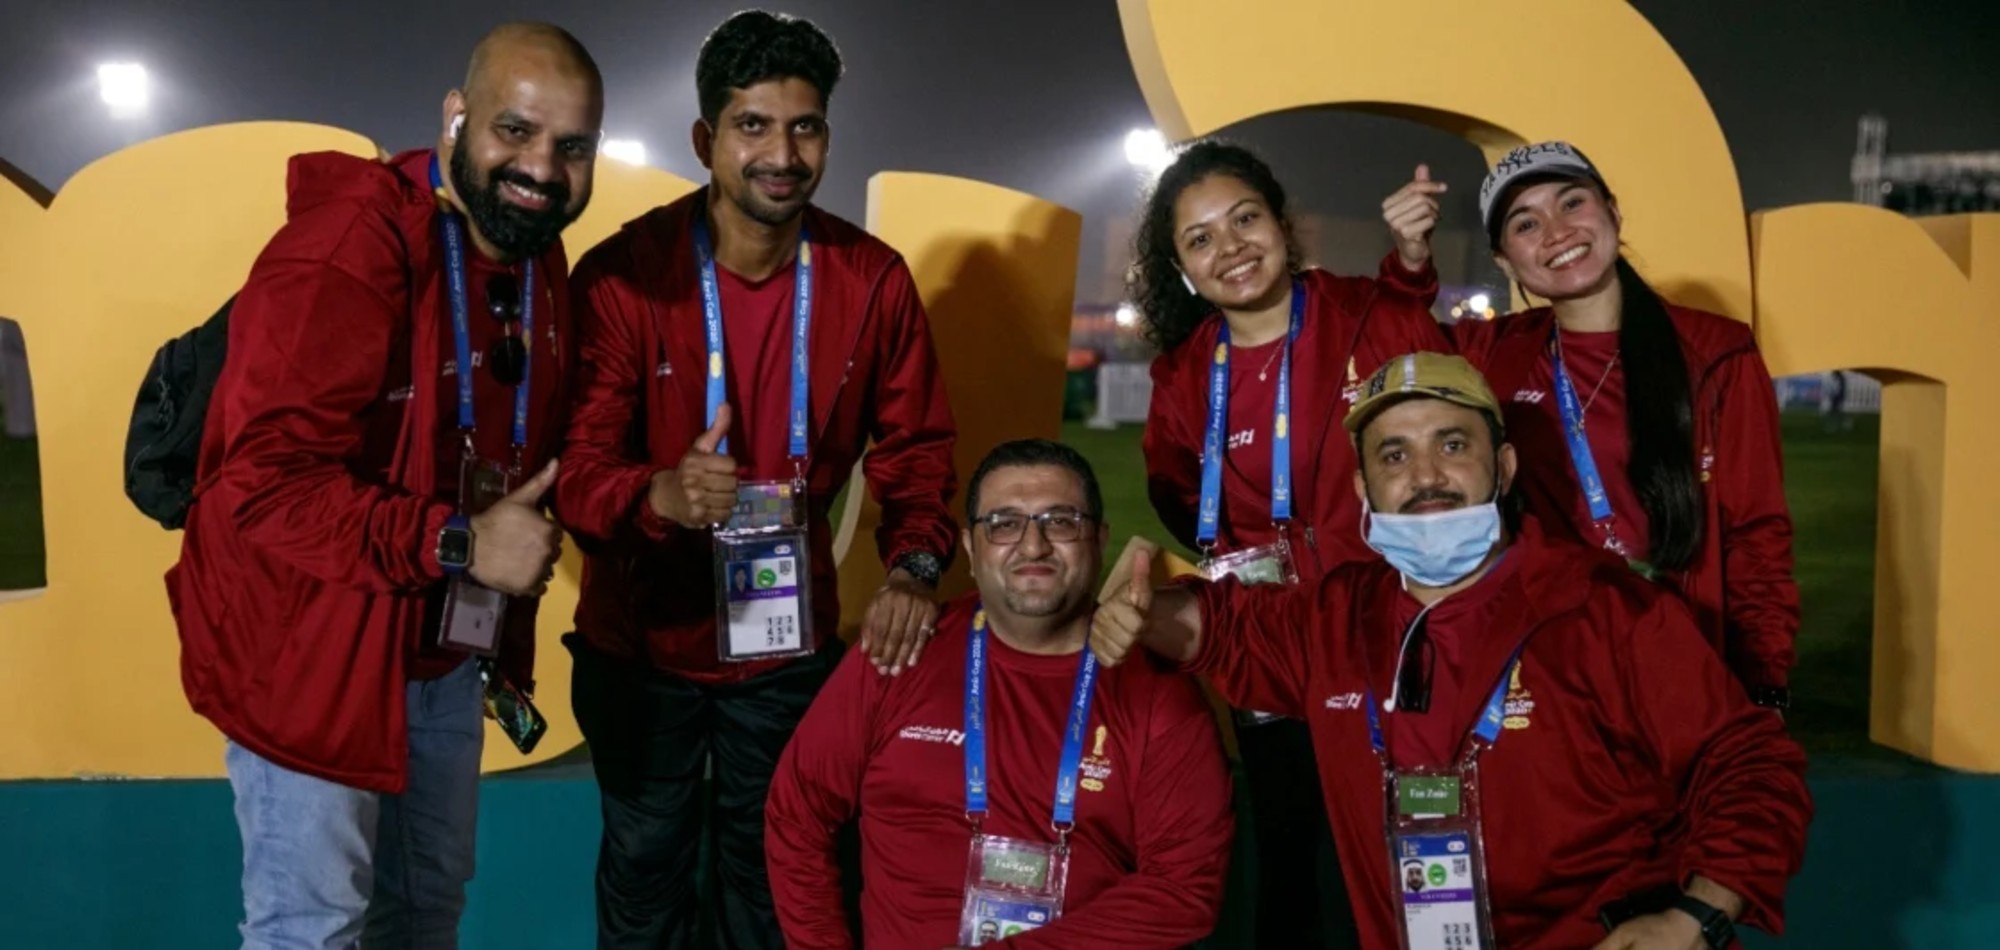 Qatar Set to Deliver the Largest Volunteer Activation for the FIFA World Cup Qatar 2022